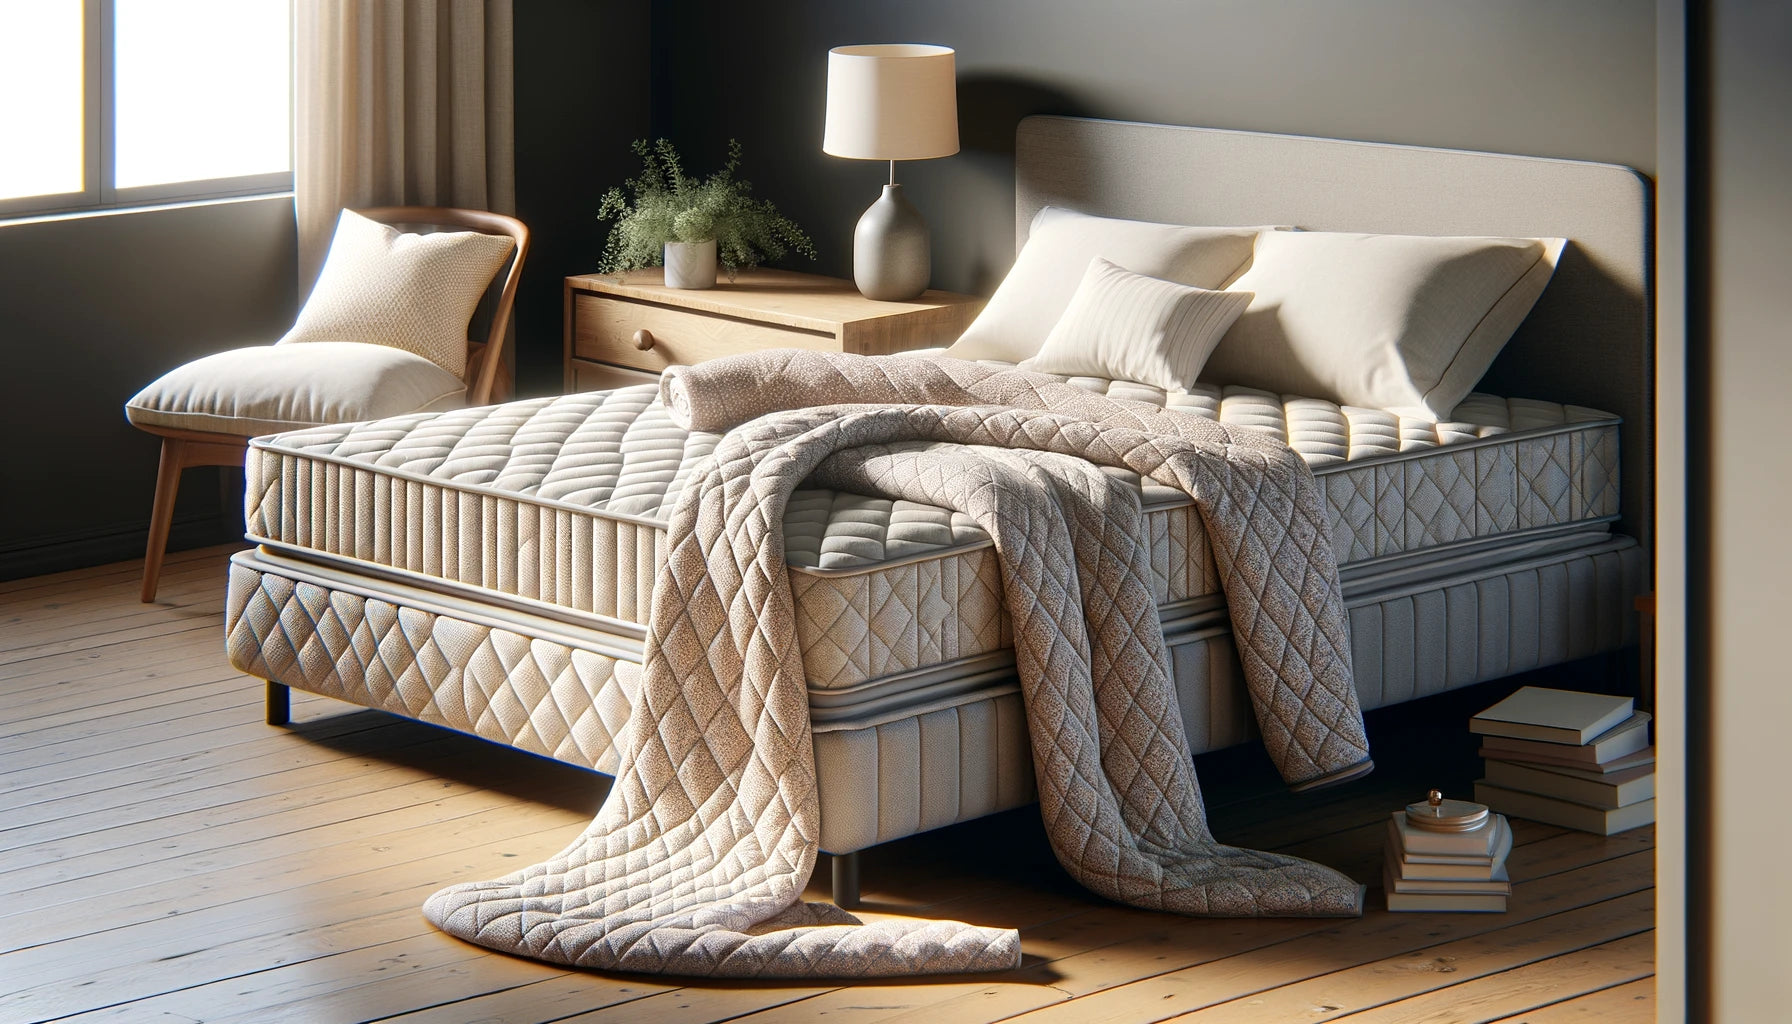 How to Wash a Quilted Blanket: Ensuring Durability and Comfort